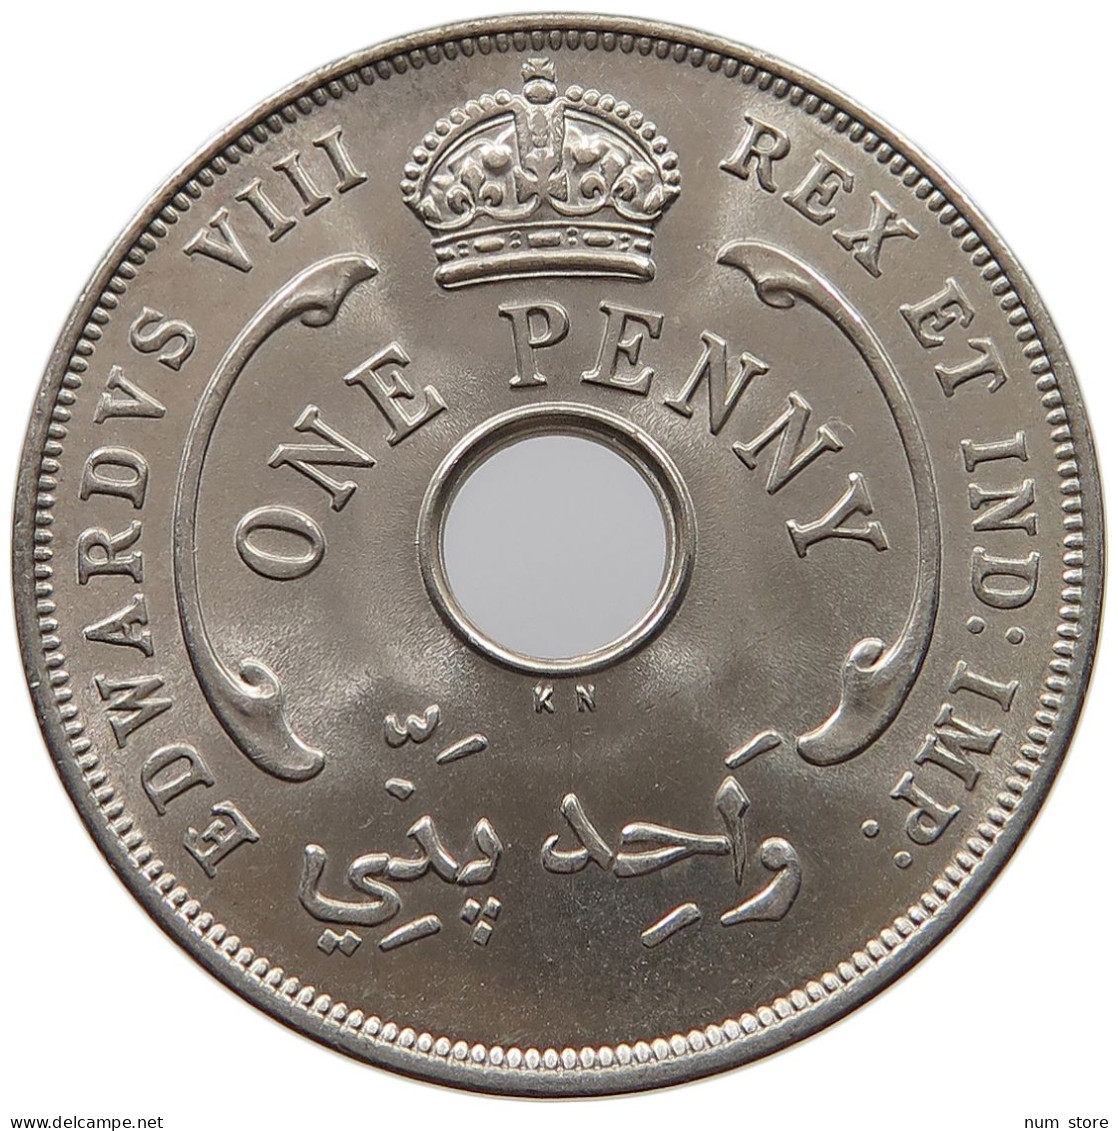 WEST AFRICA PENNY 1936 KN EDWARD VIII. #t113 0043 - Colecciones